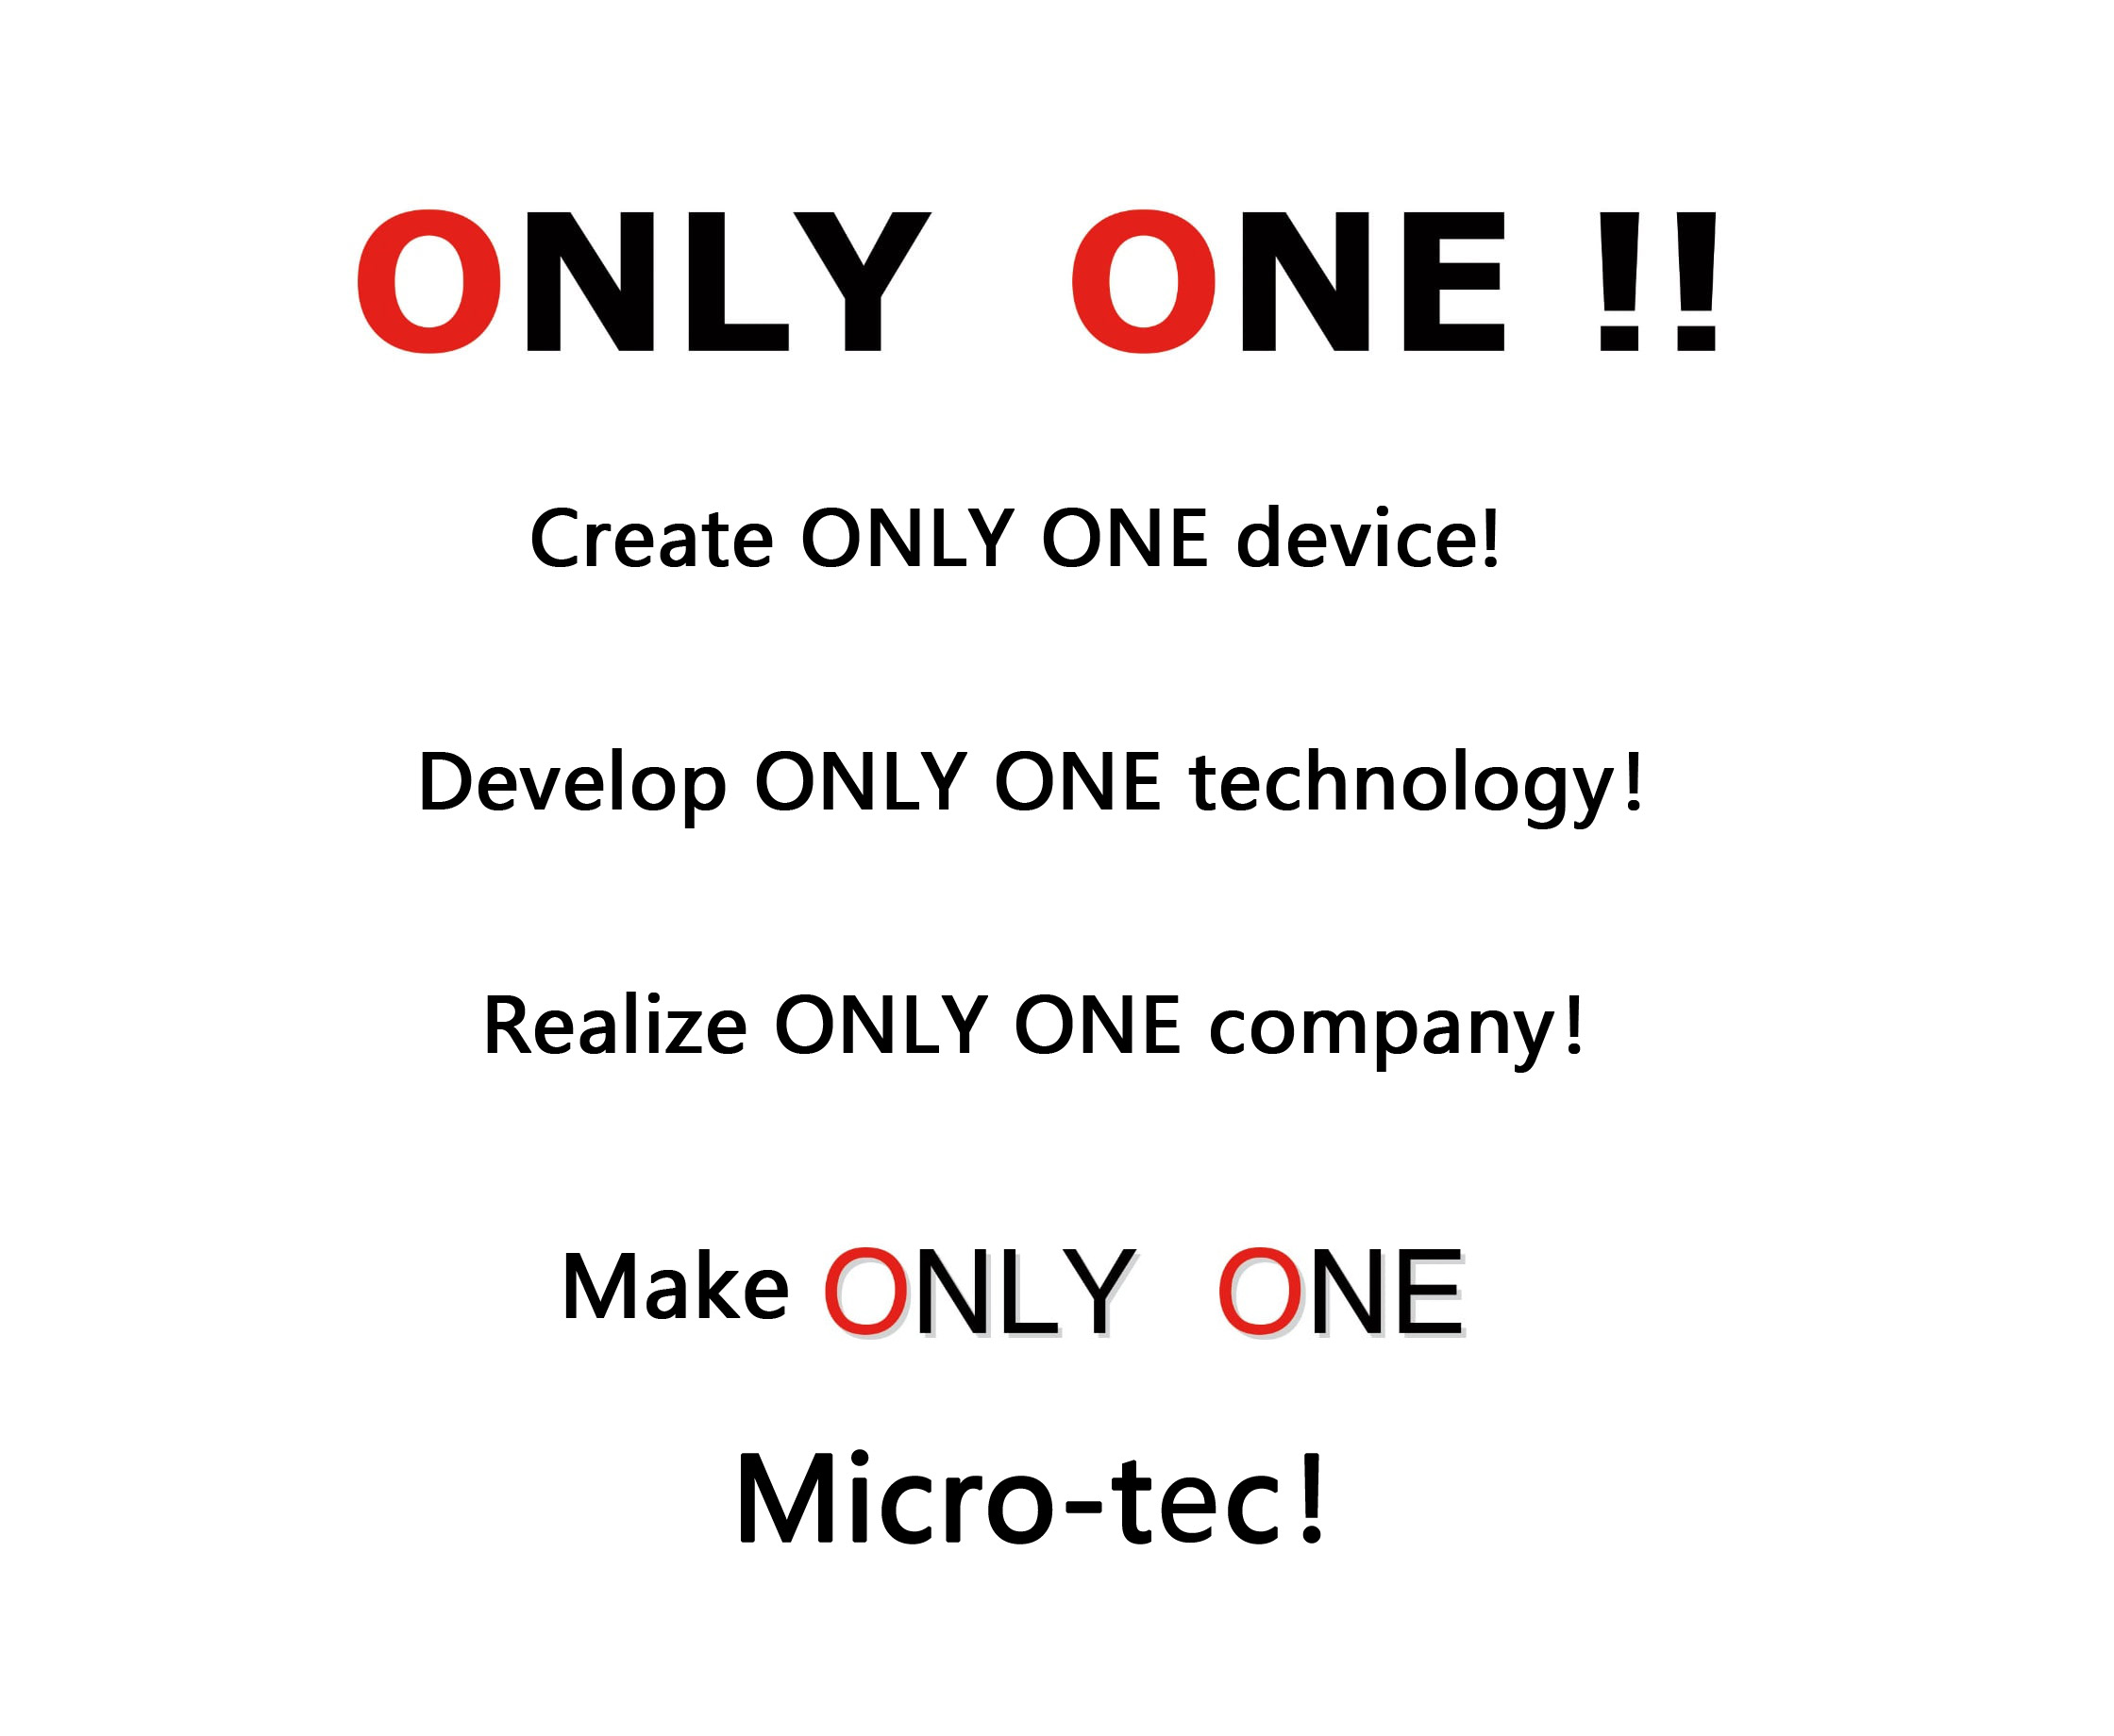 ONLY ONE!! ONLY ONEの装置をつくろう！ONLY ONEの技術を作ろう!ONLY ONEの組織をつくろう!ONLY ONEのマイクロテックにしよう!